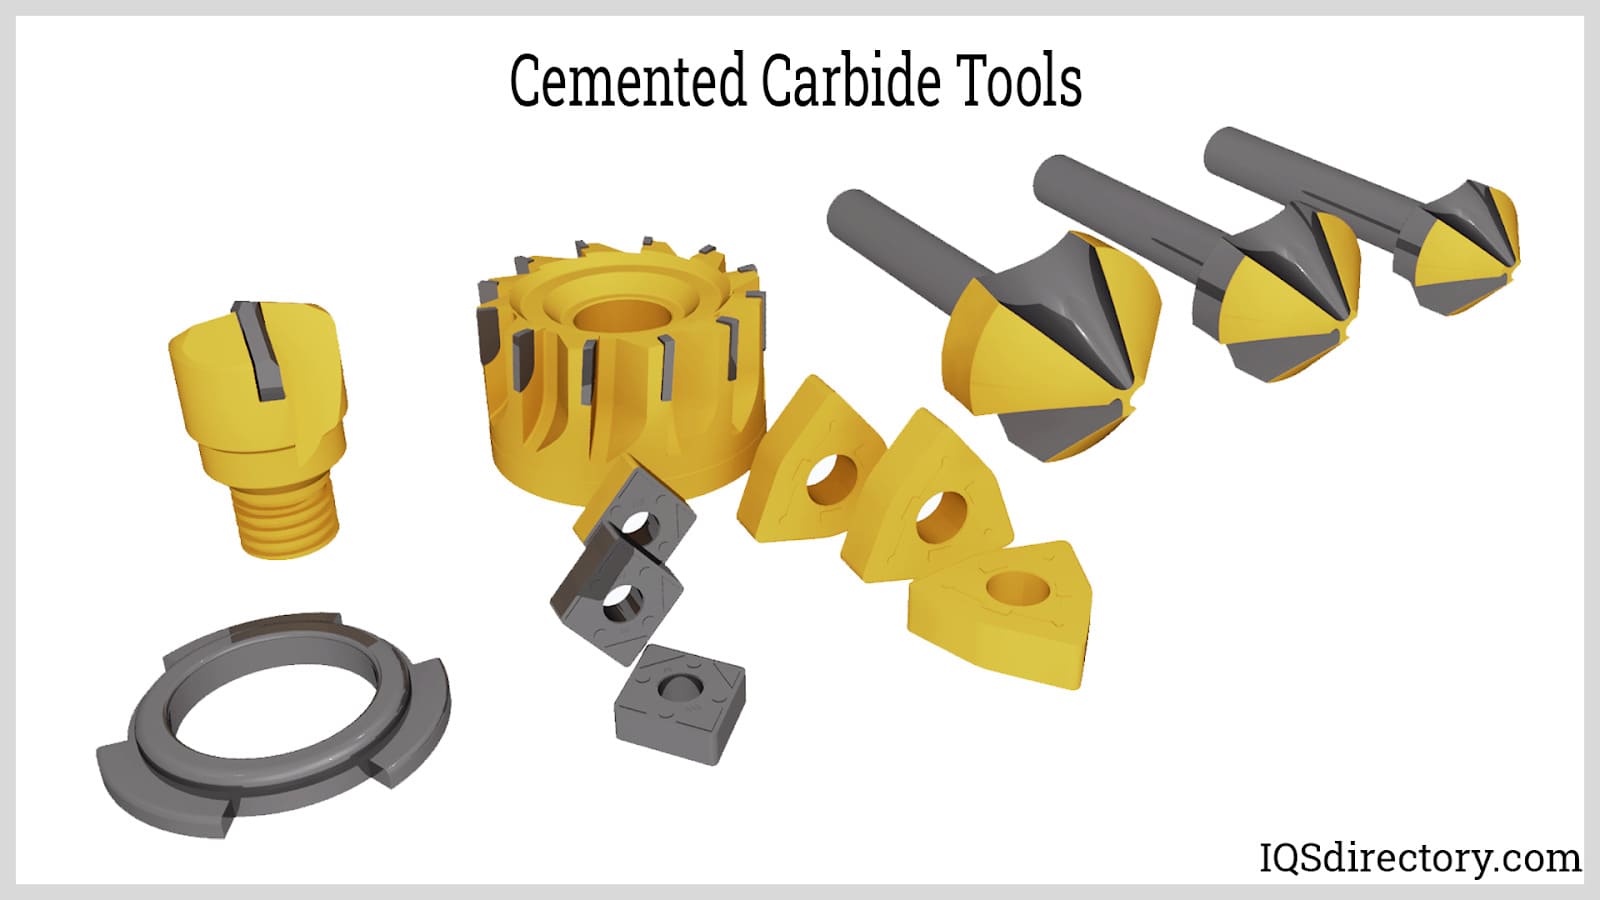 Cemented Carbide Tools